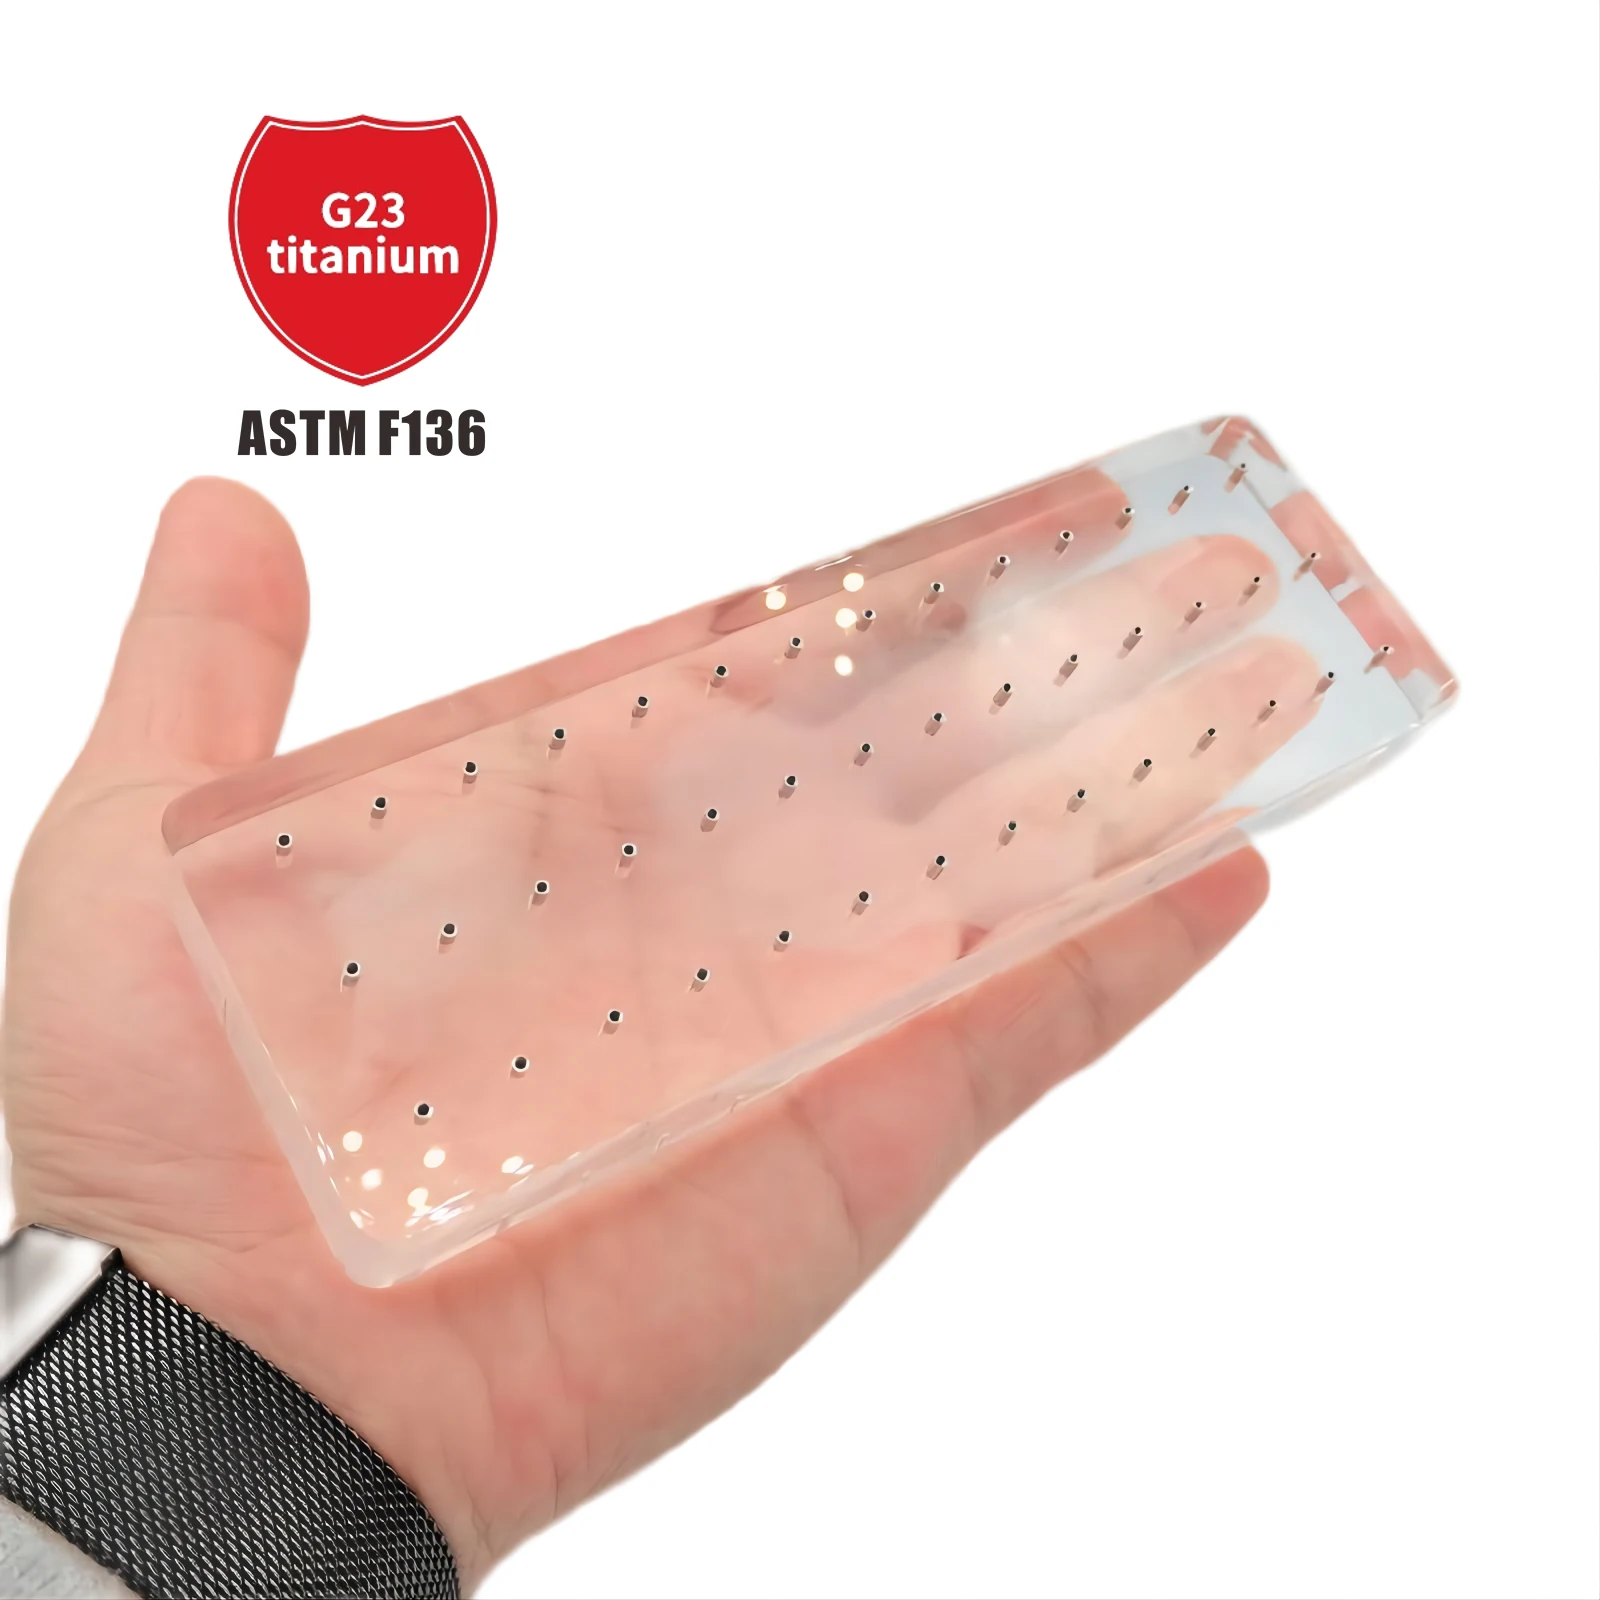 42-Hole Acrylic Display Stand High-Transparent Material Suitable For 14g/16g External Tooth Puncture Jewelry Plus 47 Nails